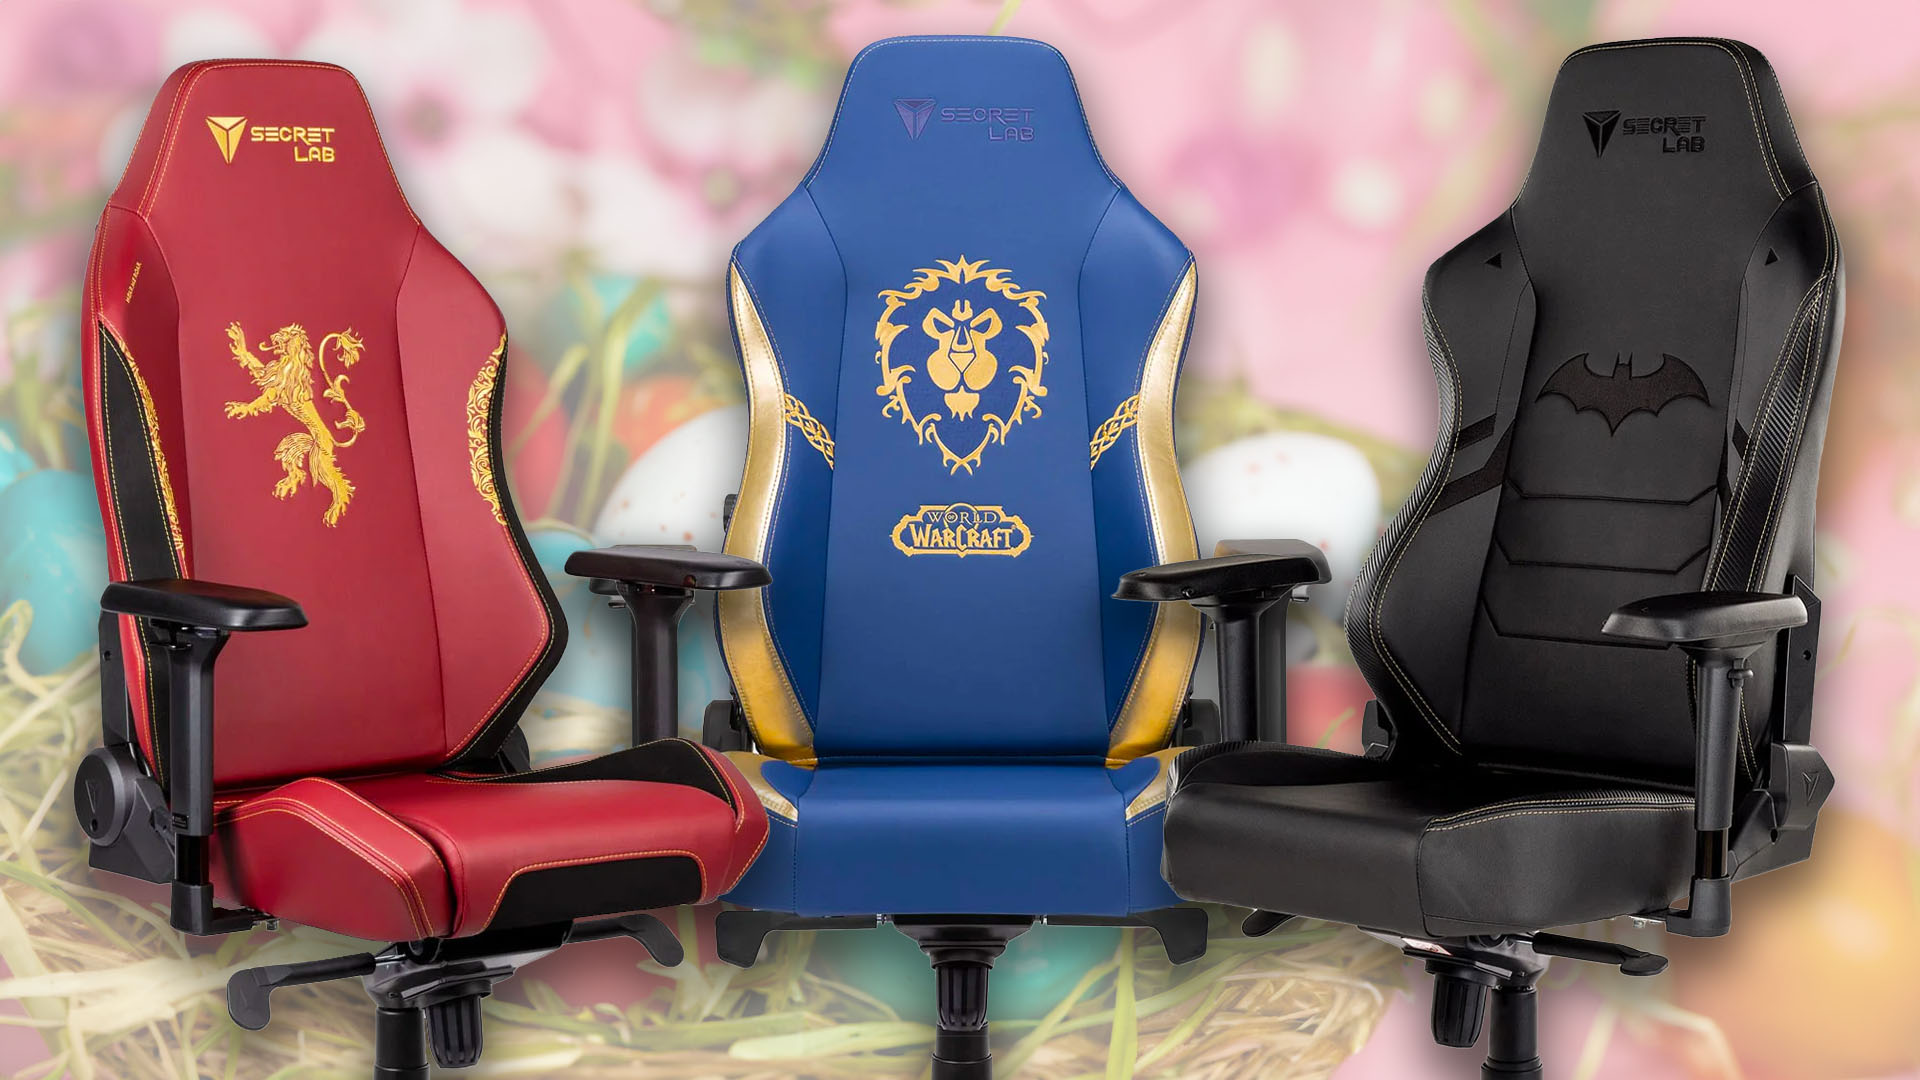 Save $100s on Secretlab gaming chairs and desks in Easter sale